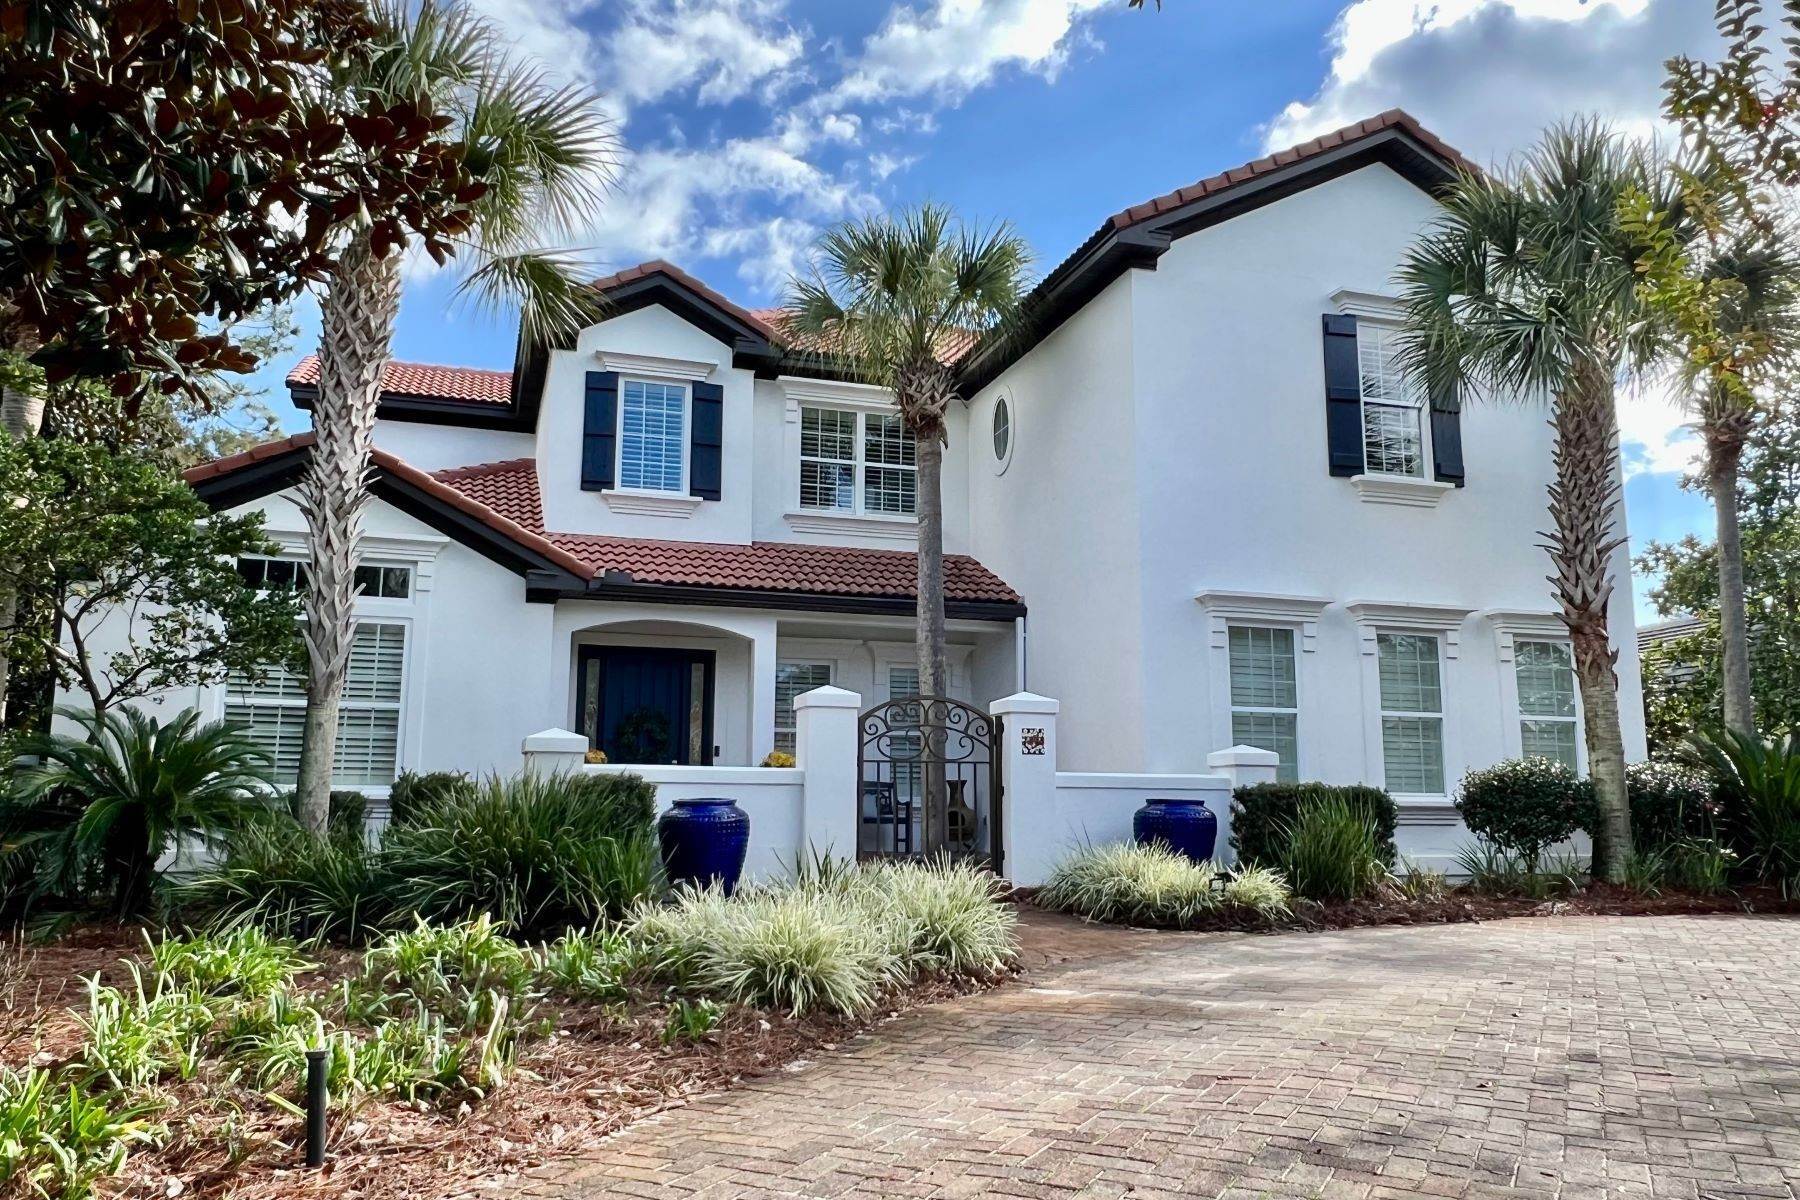 Single Family Homes for Sale at Turn-Key Golf Course Home in Gated Sandestin Community 1494 East Island Green Lane Miramar Beach, Florida 32550 United States